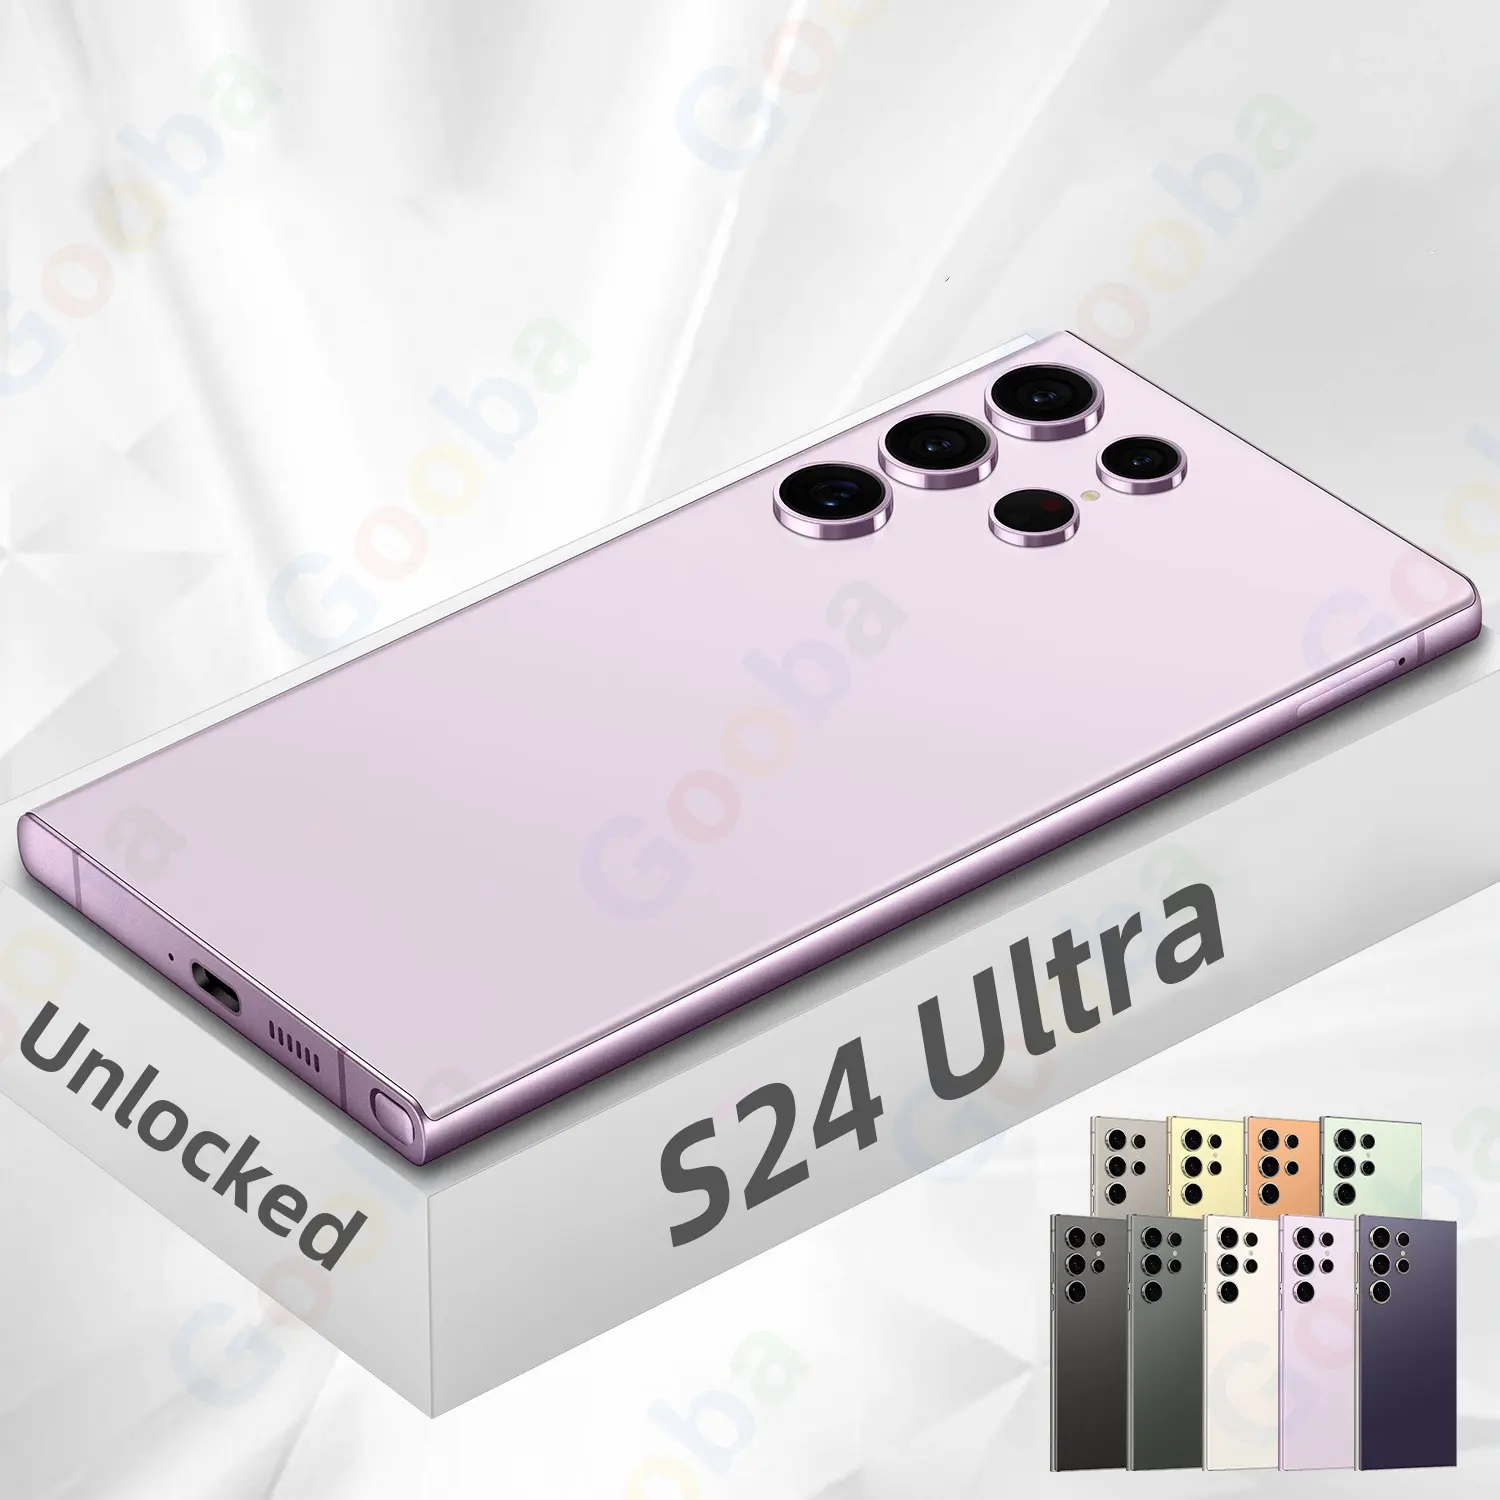 Brand New Original S24 ULTRA cell phone unlocked 4GB +64GB Android play store GPS Cheap Big screen gaming Mobile phones